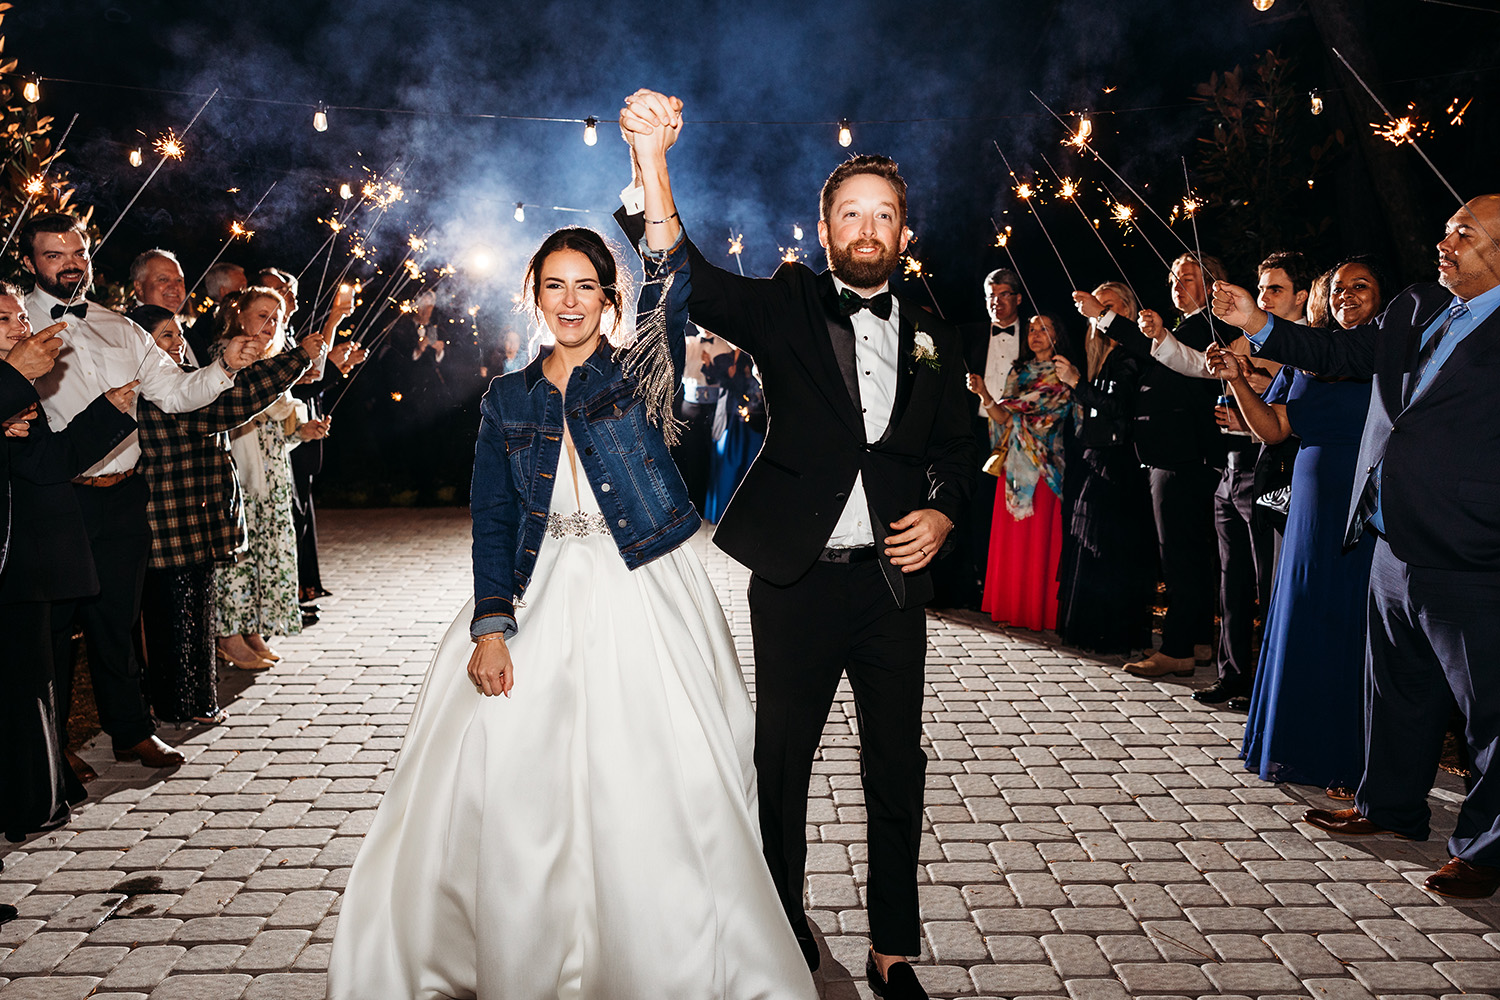 Bride and groom send-off with sparklers in the background.